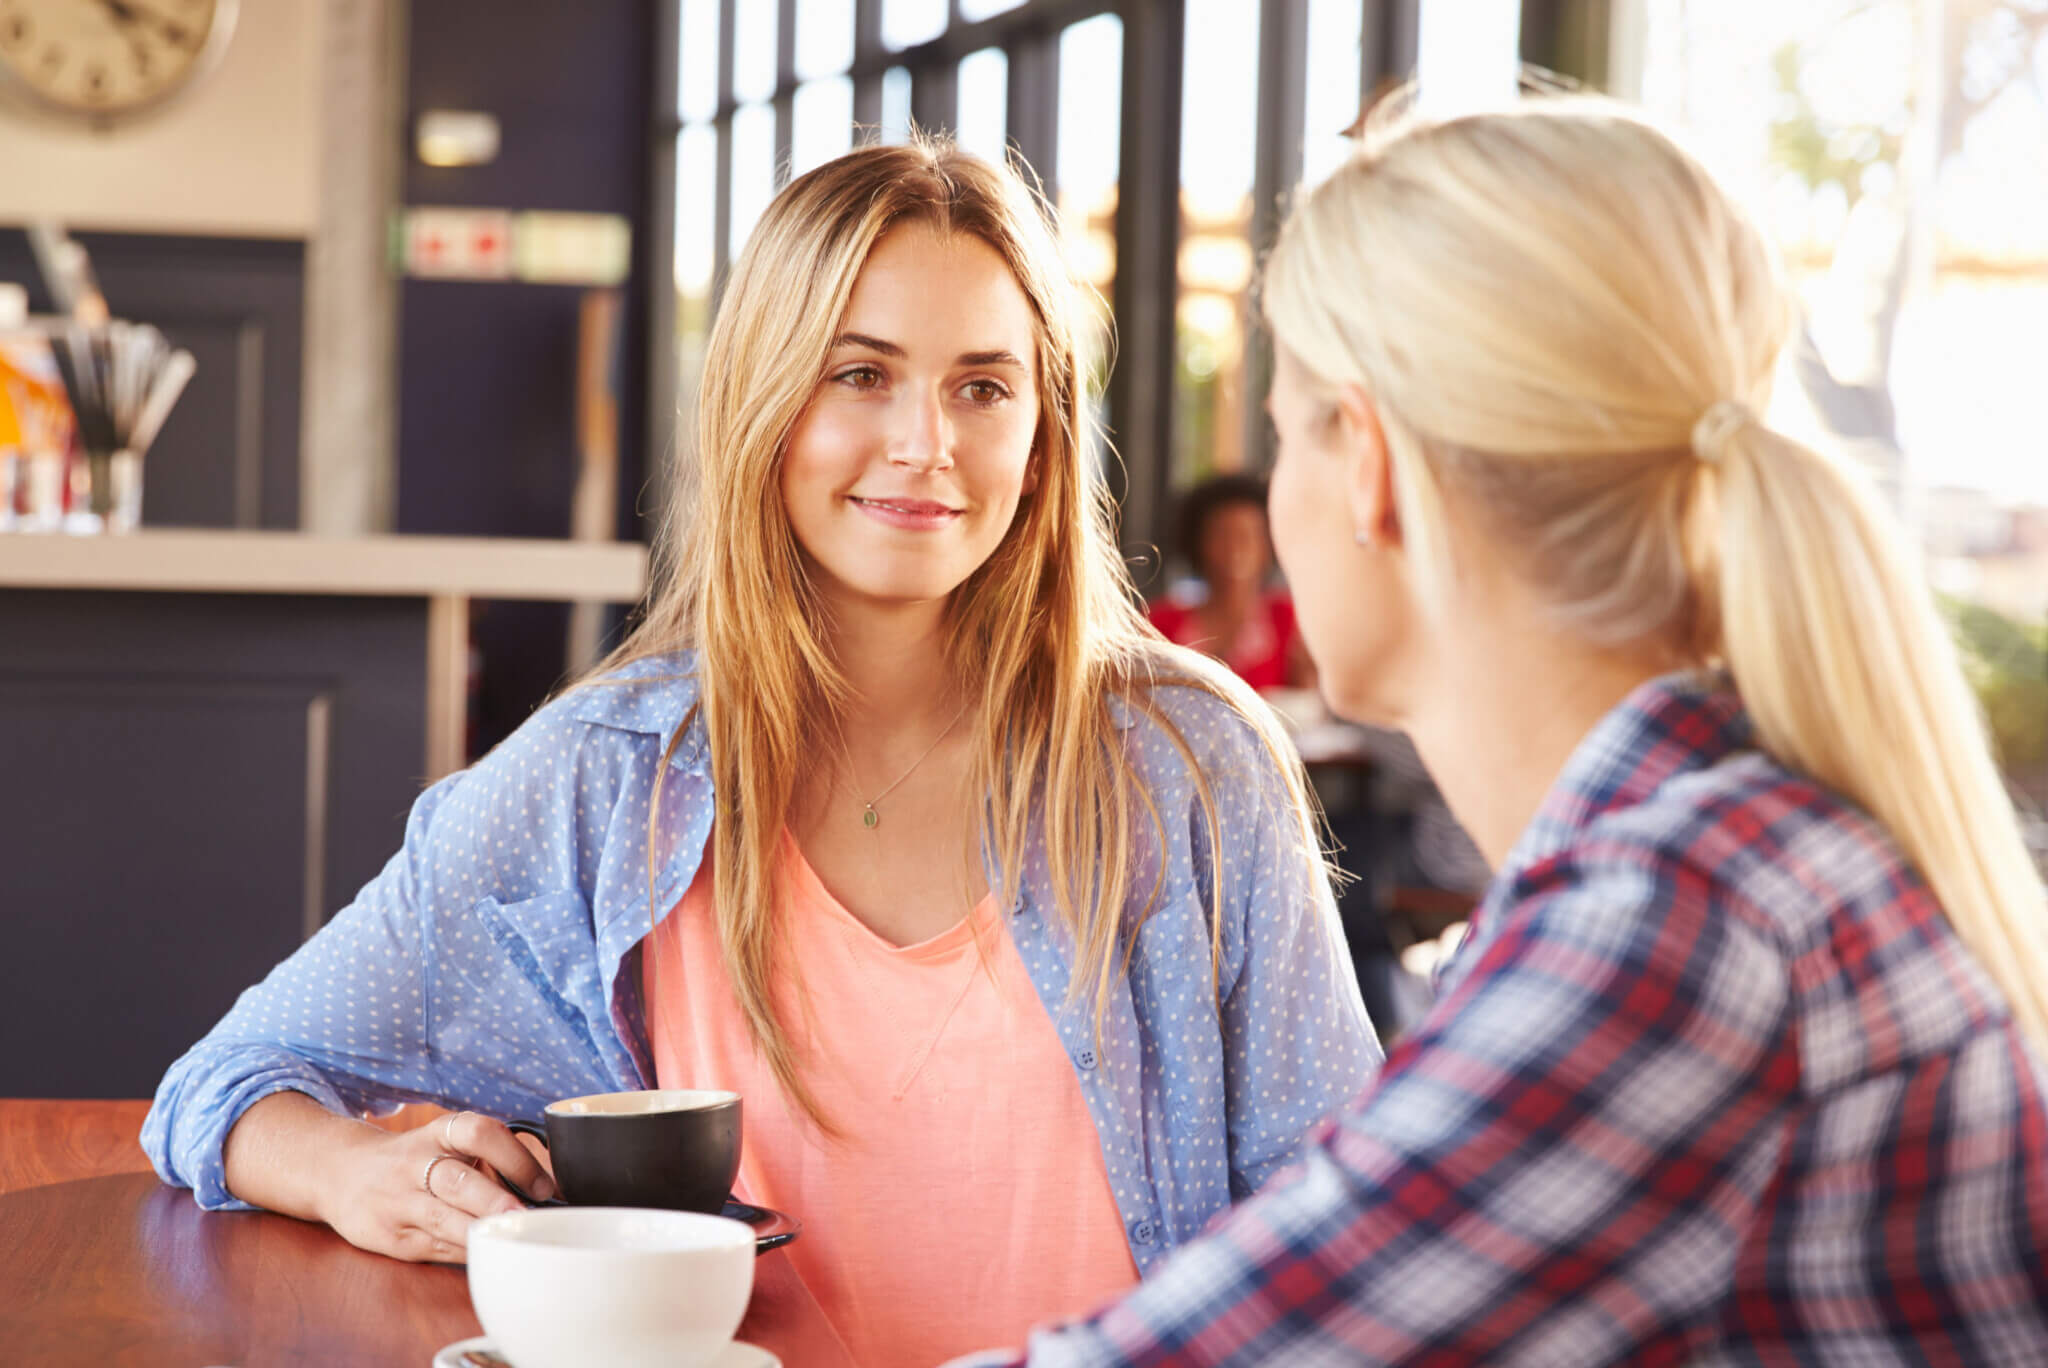 Two women having a meaningful conversation over cups of coffee